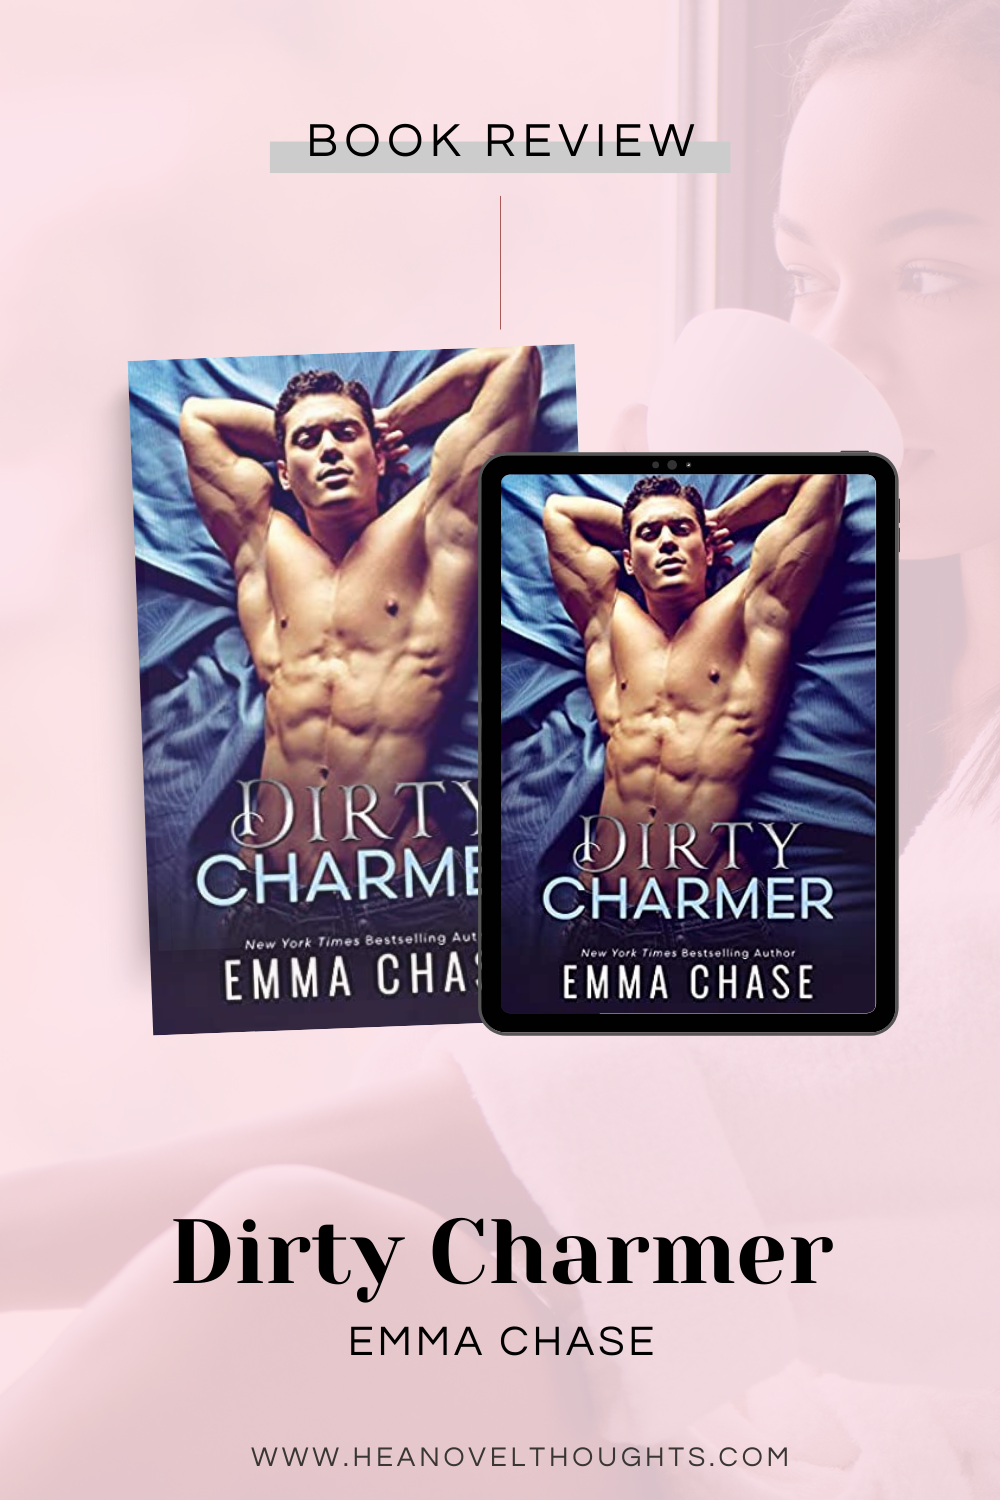 Dirty Charmer by Emma Chase